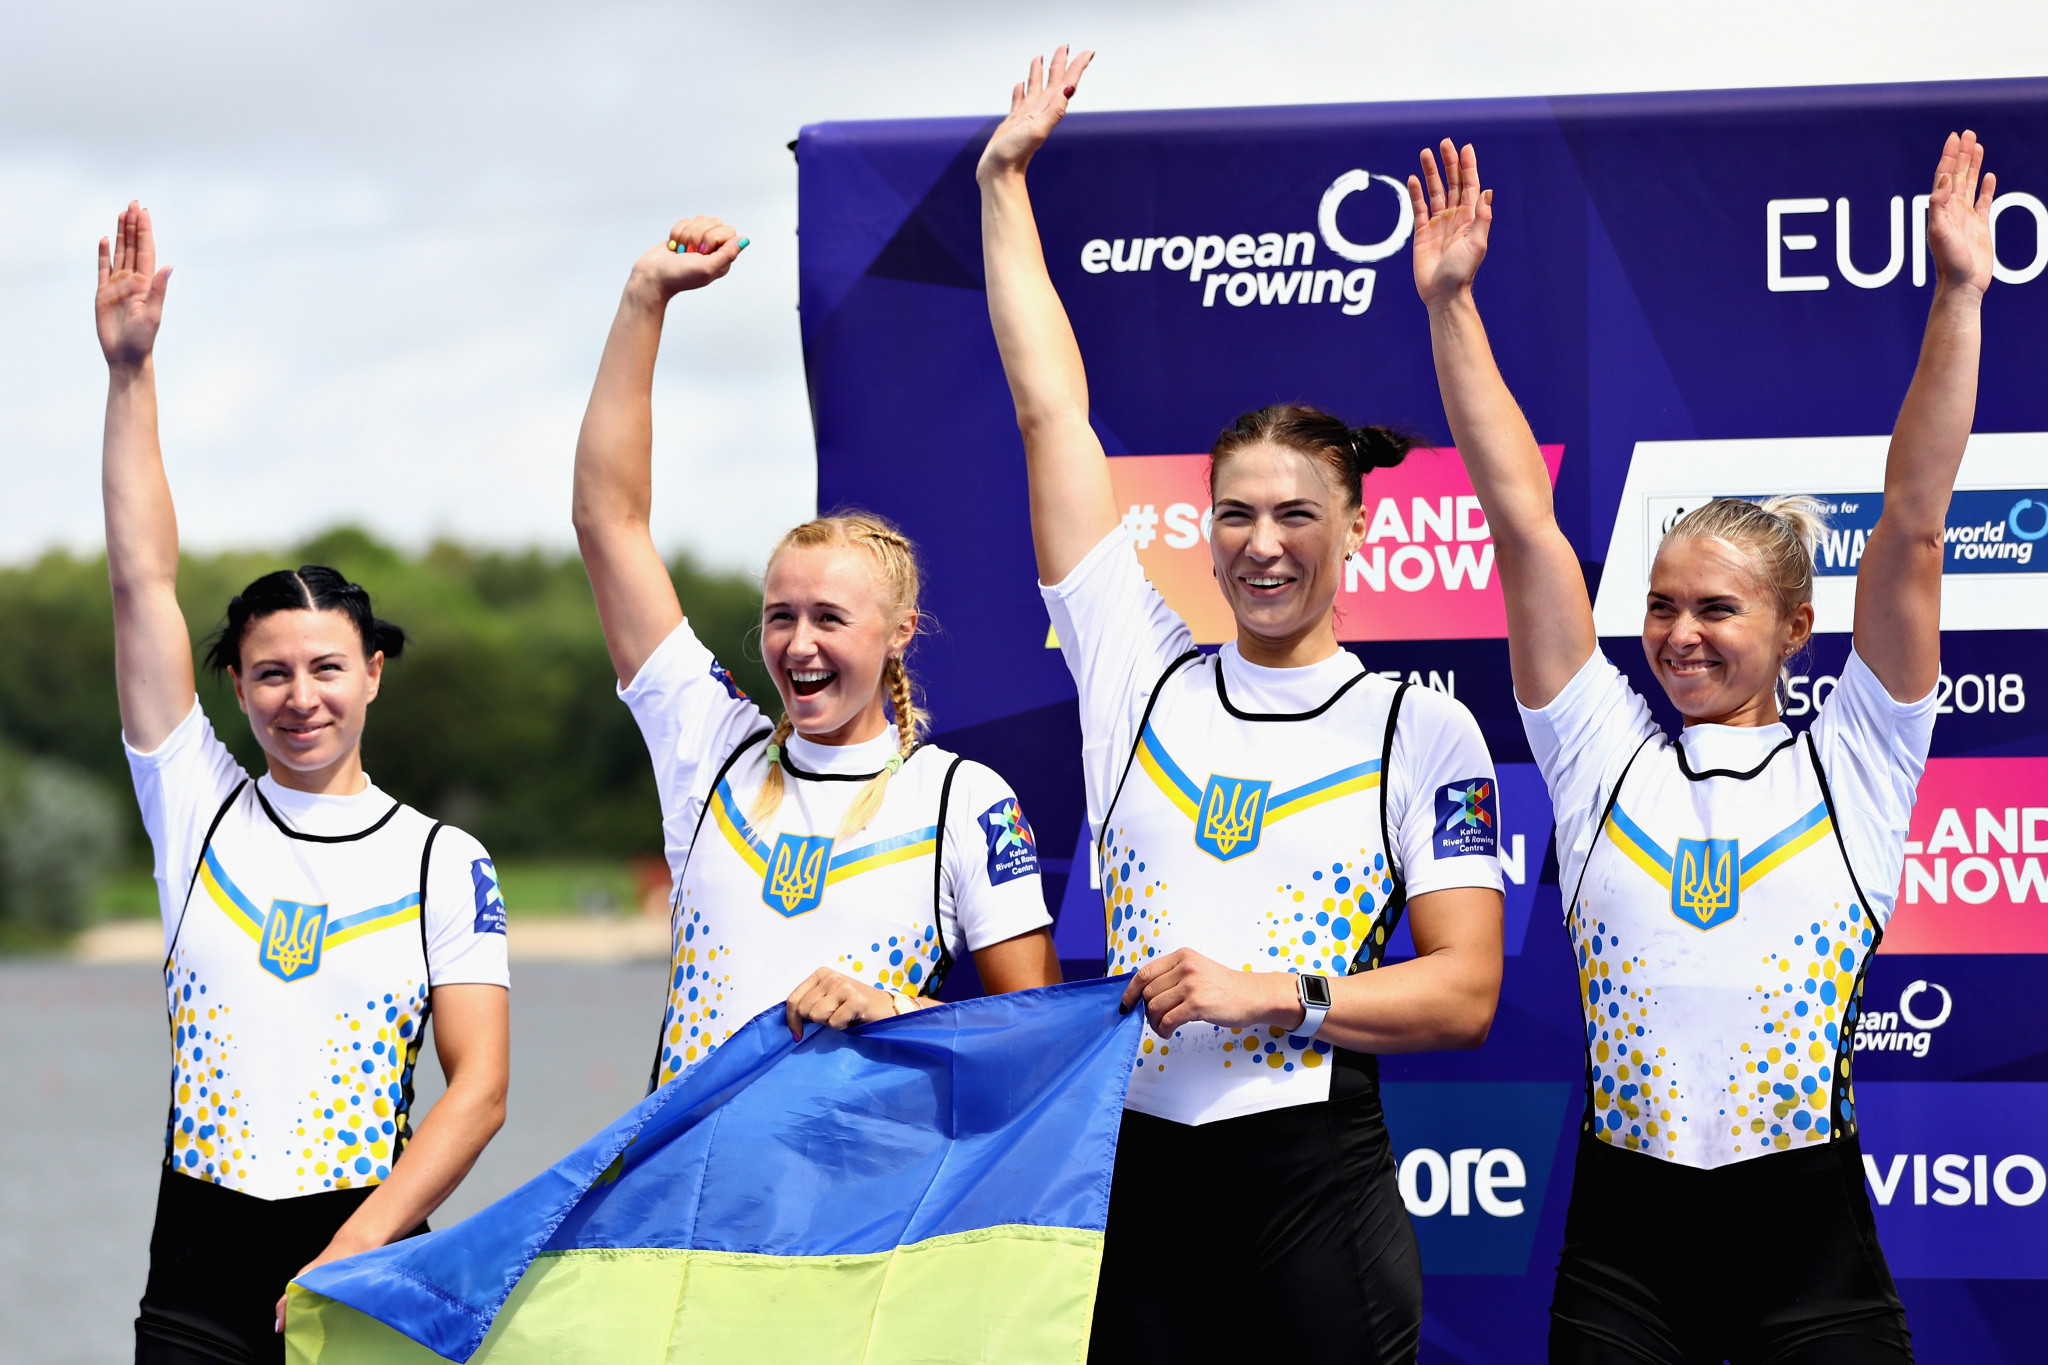 Olena Buryak, pictured second right, after helping Ukraine's women's quadruple sculls boat win silver at the 2014 European Championships, will defend her world indoor title in Paris tomorrow ©Getty Images